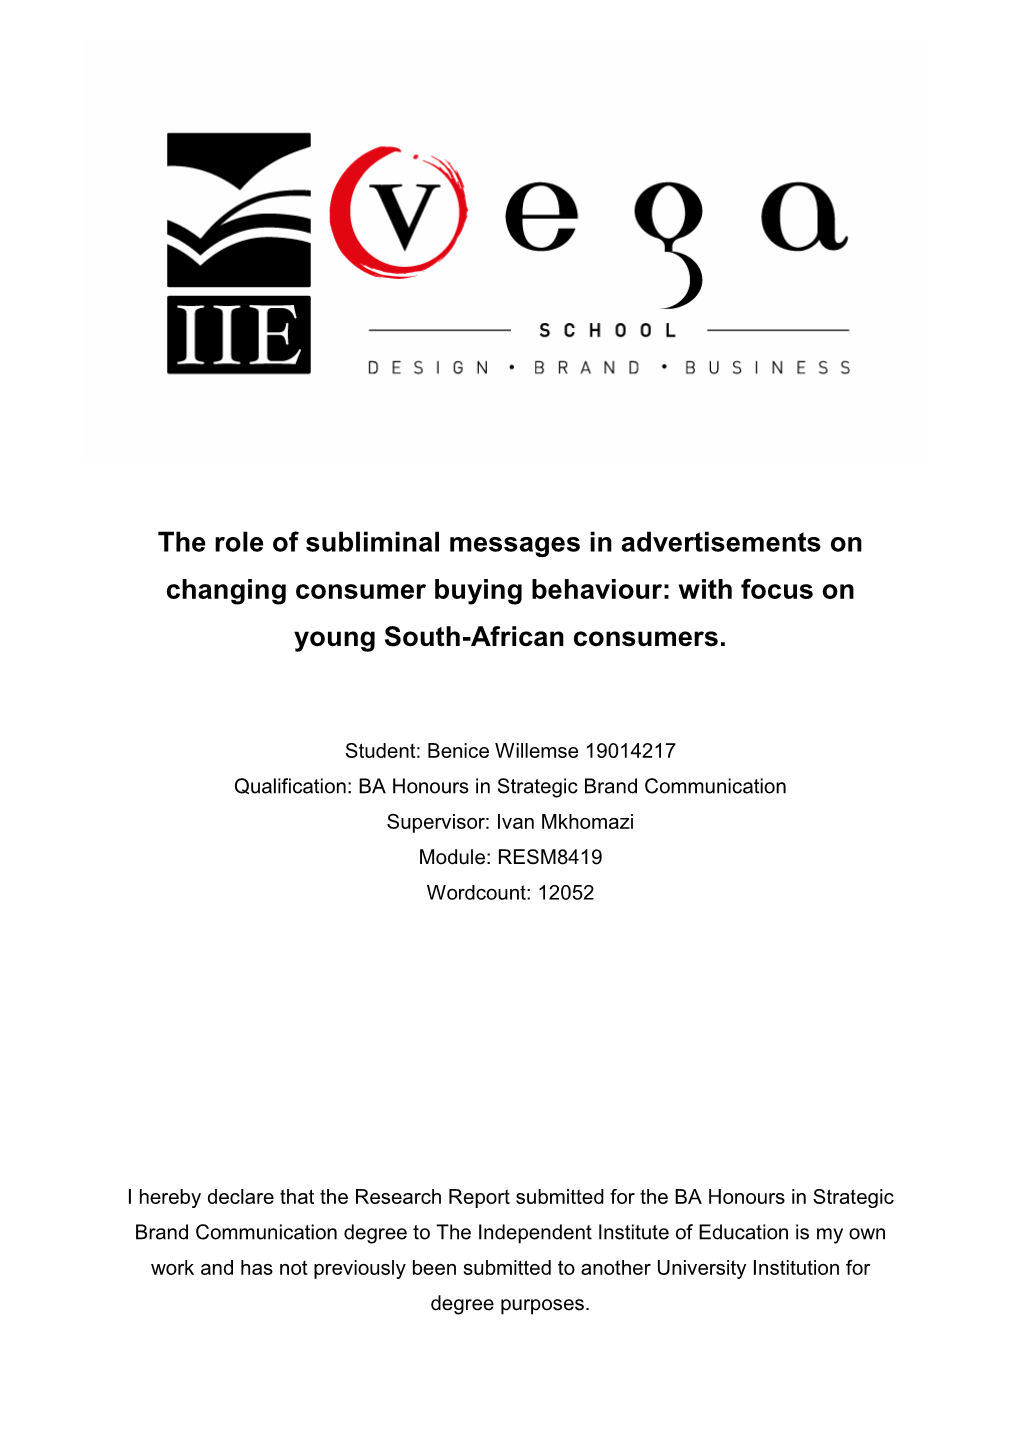 The Role of Subliminal Messages in Advertisements on Changing Consumer Buying Behaviour: with Focus on Young South-African Consumers